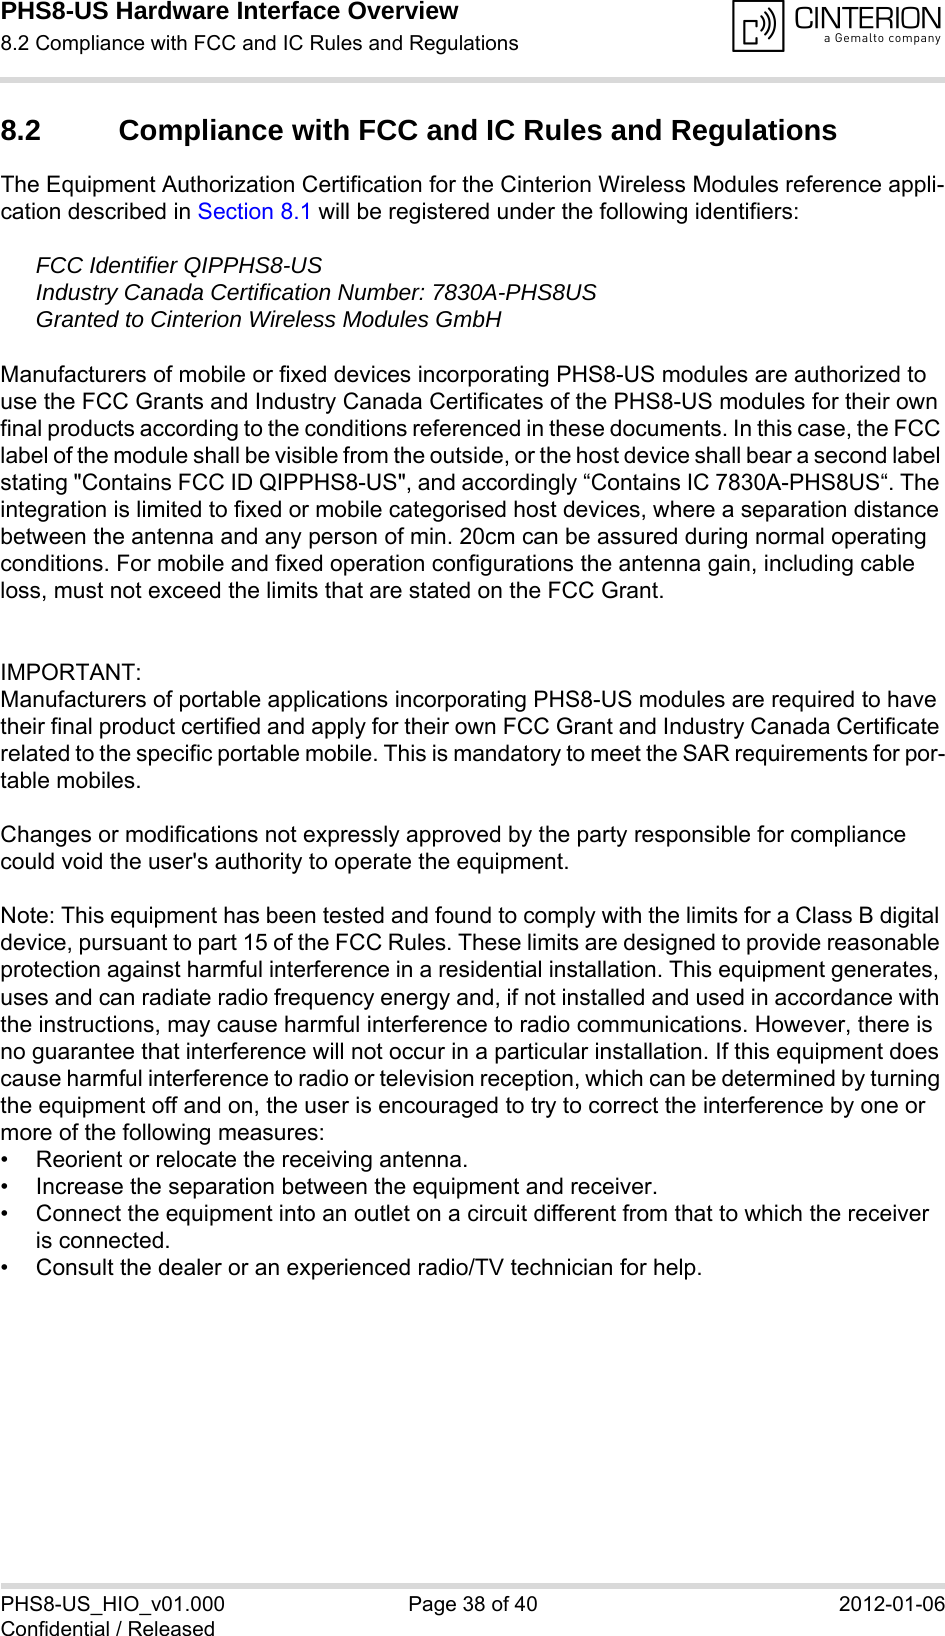 PHS8-US Hardware Interface Overview8.2 Compliance with FCC and IC Rules and Regulations38PHS8-US_HIO_v01.000 Page 38 of 40 2012-01-06Confidential / Released8.2 Compliance with FCC and IC Rules and Regulations The Equipment Authorization Certification for the Cinterion Wireless Modules reference appli-cation described in Section 8.1 will be registered under the following identifiers:FCC Identifier QIPPHS8-USIndustry Canada Certification Number: 7830A-PHS8USGranted to Cinterion Wireless Modules GmbH Manufacturers of mobile or fixed devices incorporating PHS8-US modules are authorized to use the FCC Grants and Industry Canada Certificates of the PHS8-US modules for their own final products according to the conditions referenced in these documents. In this case, the FCC label of the module shall be visible from the outside, or the host device shall bear a second label stating &quot;Contains FCC ID QIPPHS8-US&quot;, and accordingly “Contains IC 7830A-PHS8US“. The integration is limited to fixed or mobile categorised host devices, where a separation distance between the antenna and any person of min. 20cm can be assured during normal operating conditions. For mobile and fixed operation configurations the antenna gain, including cable loss, must not exceed the limits that are stated on the FCC Grant.IMPORTANT:Manufacturers of portable applications incorporating PHS8-US modules are required to have their final product certified and apply for their own FCC Grant and Industry Canada Certificate related to the specific portable mobile. This is mandatory to meet the SAR requirements for por-table mobiles.Changes or modifications not expressly approved by the party responsible for compliance could void the user&apos;s authority to operate the equipment.Note: This equipment has been tested and found to comply with the limits for a Class B digital device, pursuant to part 15 of the FCC Rules. These limits are designed to provide reasonable protection against harmful interference in a residential installation. This equipment generates, uses and can radiate radio frequency energy and, if not installed and used in accordance with the instructions, may cause harmful interference to radio communications. However, there is no guarantee that interference will not occur in a particular installation. If this equipment does cause harmful interference to radio or television reception, which can be determined by turning the equipment off and on, the user is encouraged to try to correct the interference by one or more of the following measures: • Reorient or relocate the receiving antenna. • Increase the separation between the equipment and receiver. • Connect the equipment into an outlet on a circuit different from that to which the receiver is connected. • Consult the dealer or an experienced radio/TV technician for help.